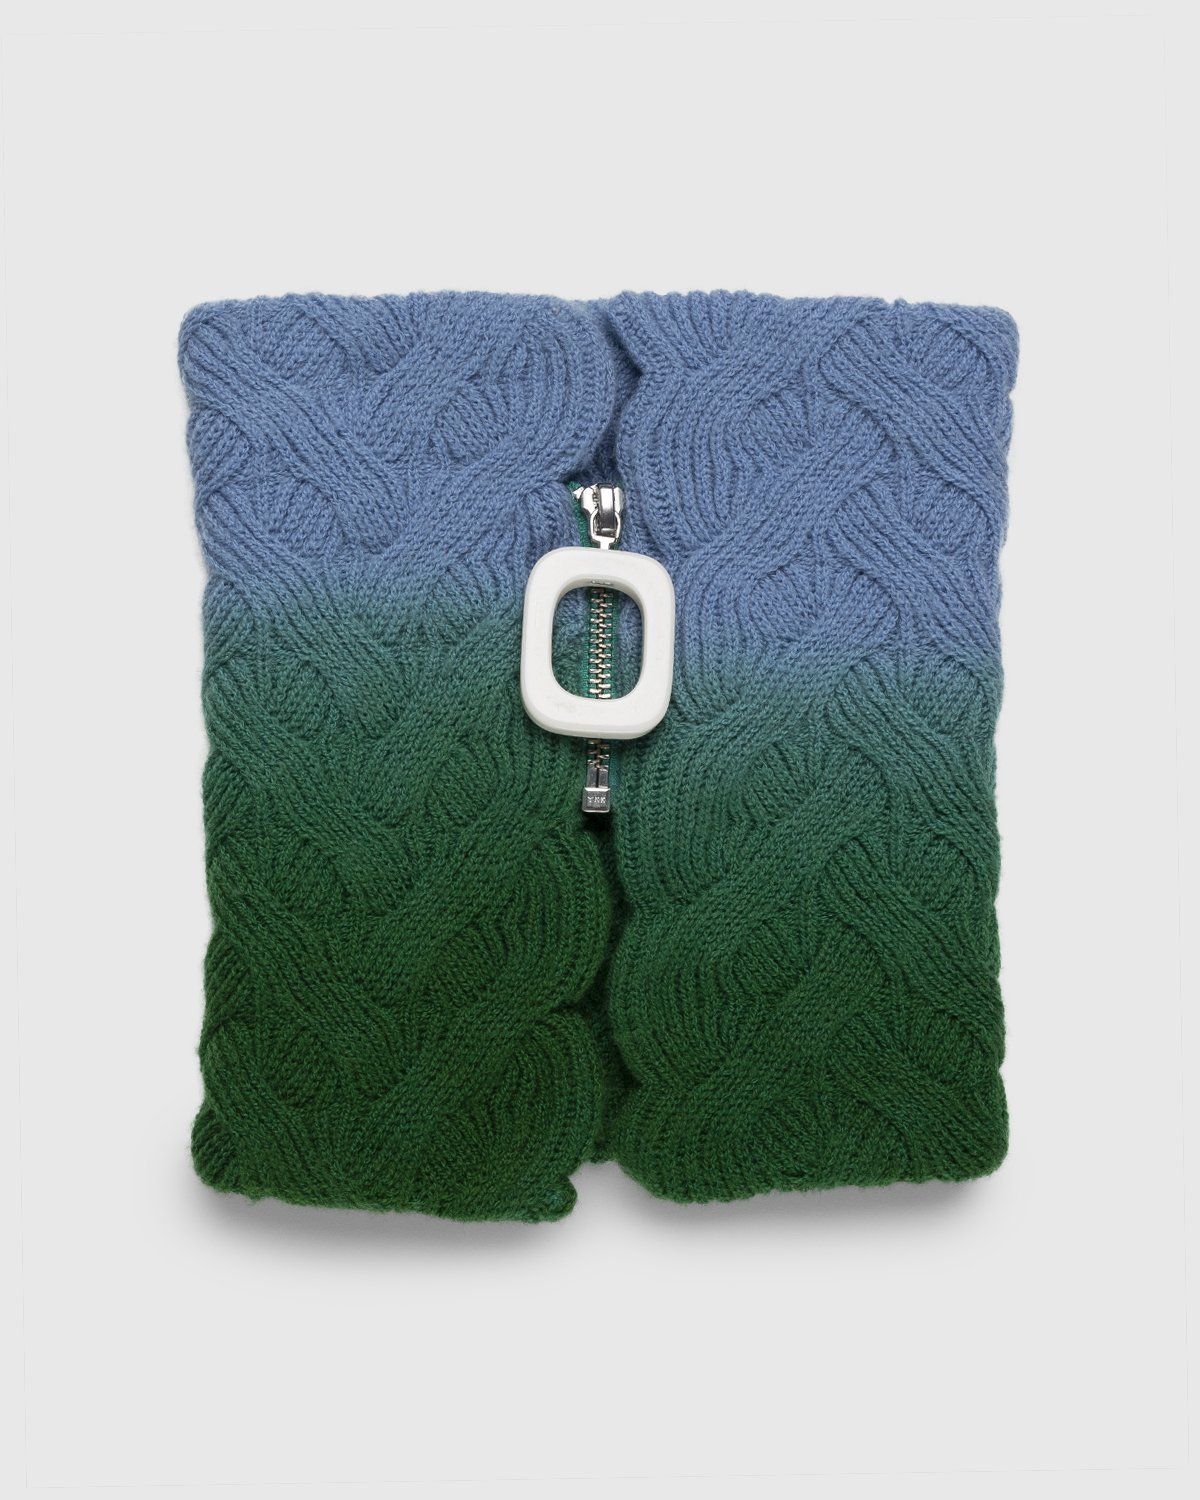 J.W. Anderson – Cable Knit Foldover Neckband Green/Blue - Scarves - Multi - Image 1